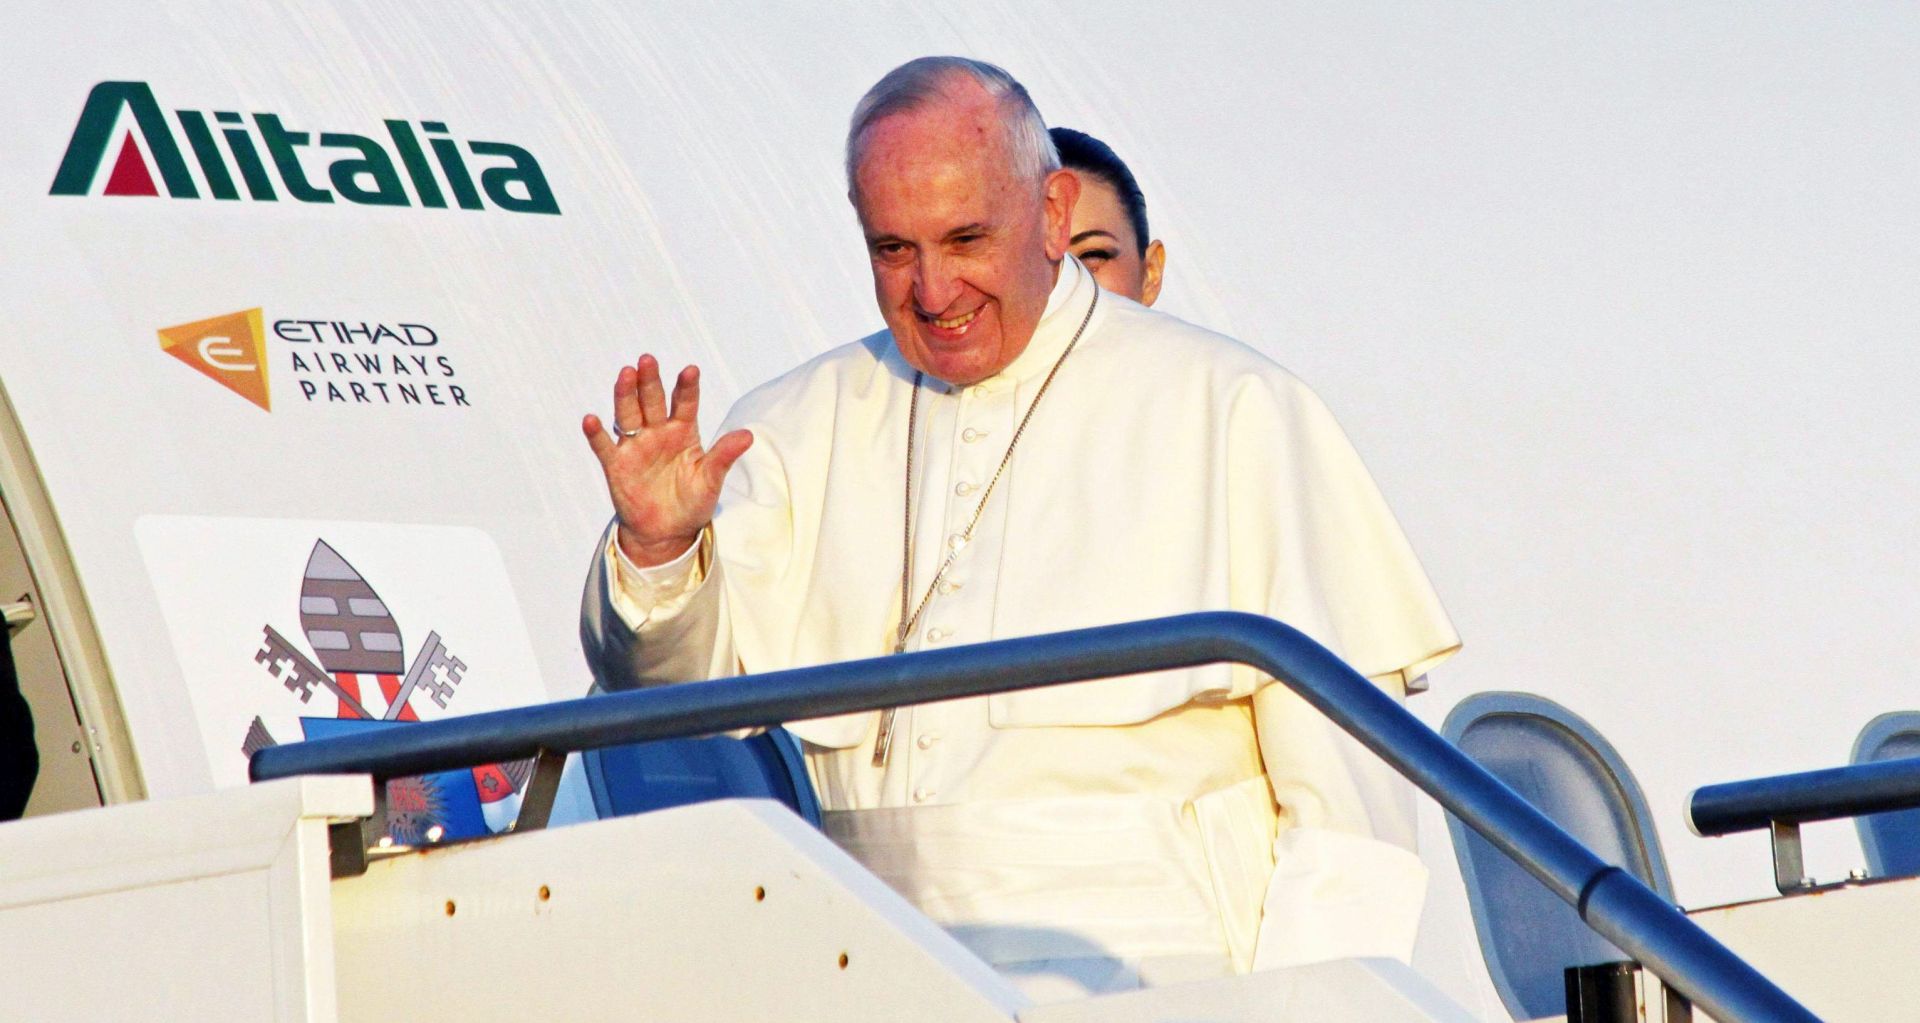 epa05261089 Pope Francis waves as he boards a plane at Leonardo Da Vinci Airport in Fiumicino, Italy, 16 April 2016. Pope Francis will visit Lesbos island, Greece, where he aims to show his support to migrants fleeing poverty and war to reach the eastern Aegean islands after a dangerous journey, according to media reports.  EPA/TELENEWS